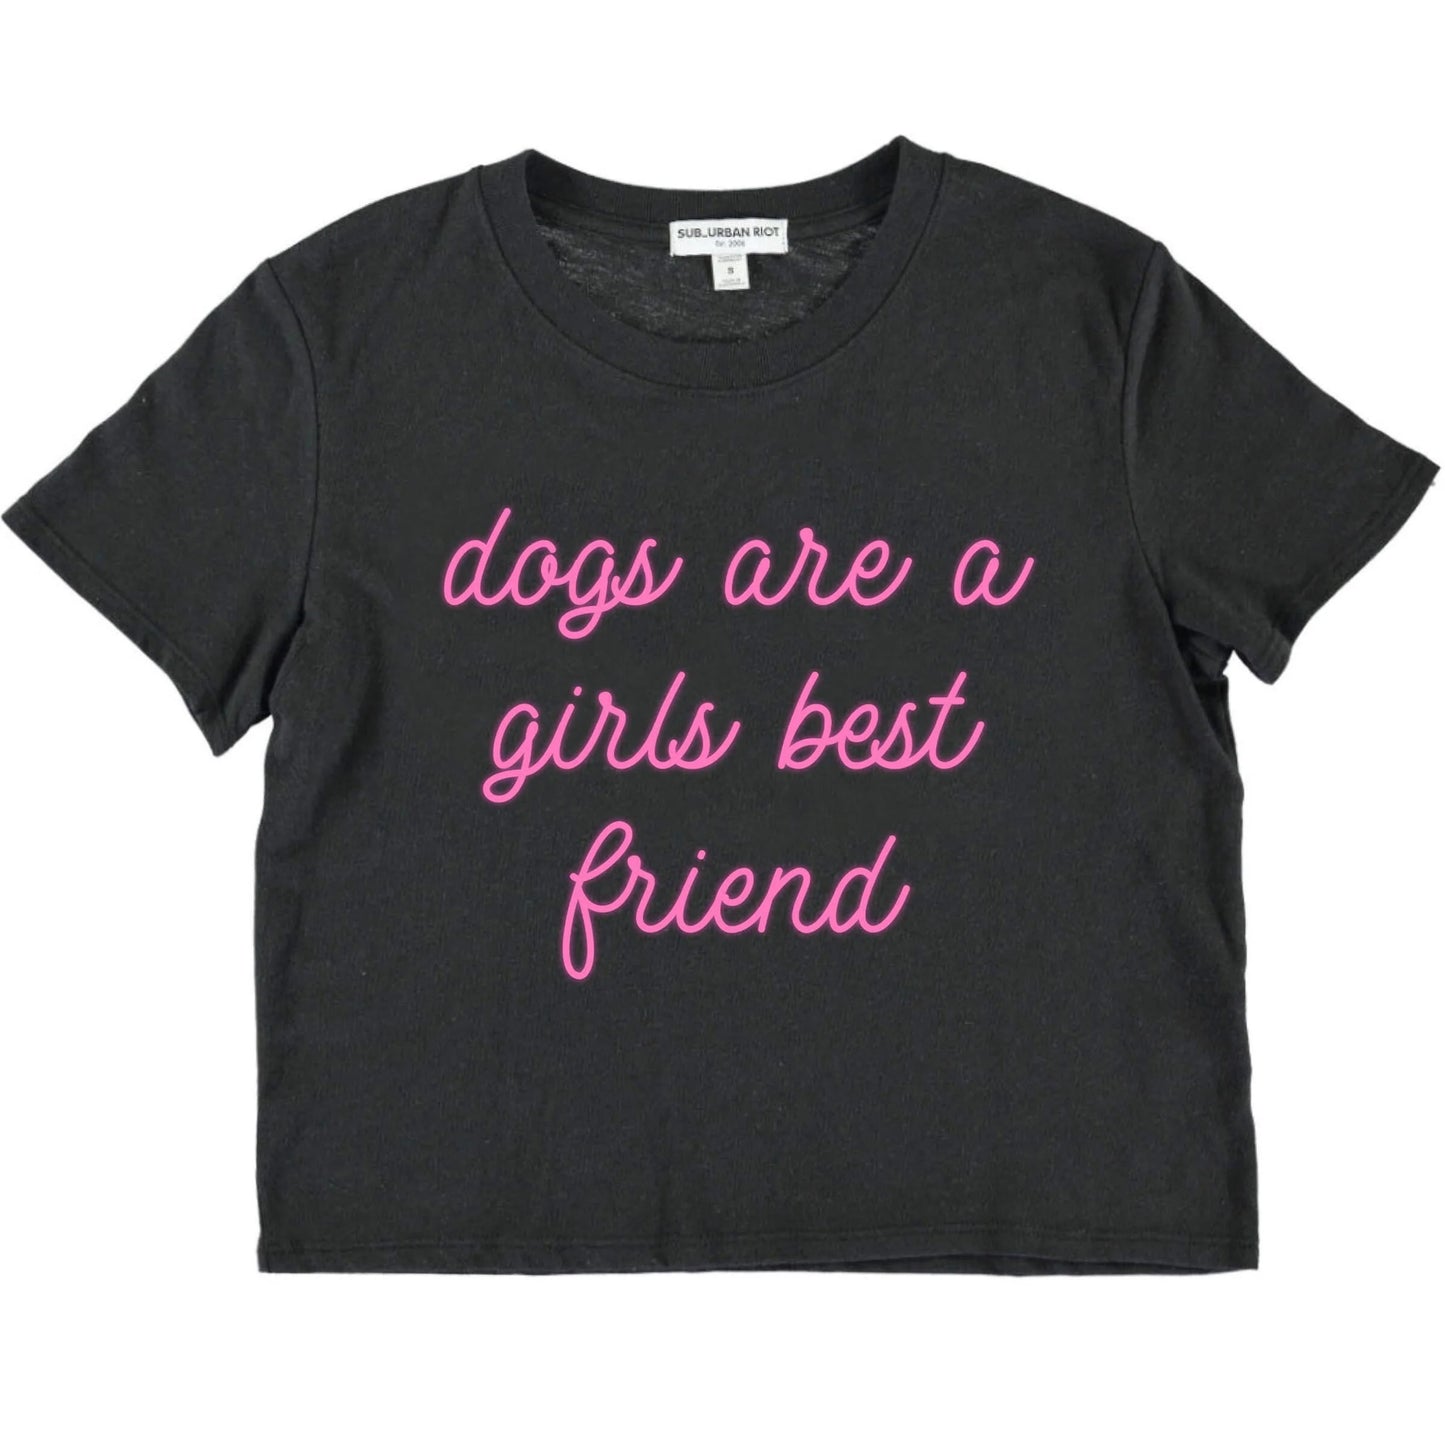 Dogs Are A Girls Best Friend Boxy Tee, Black